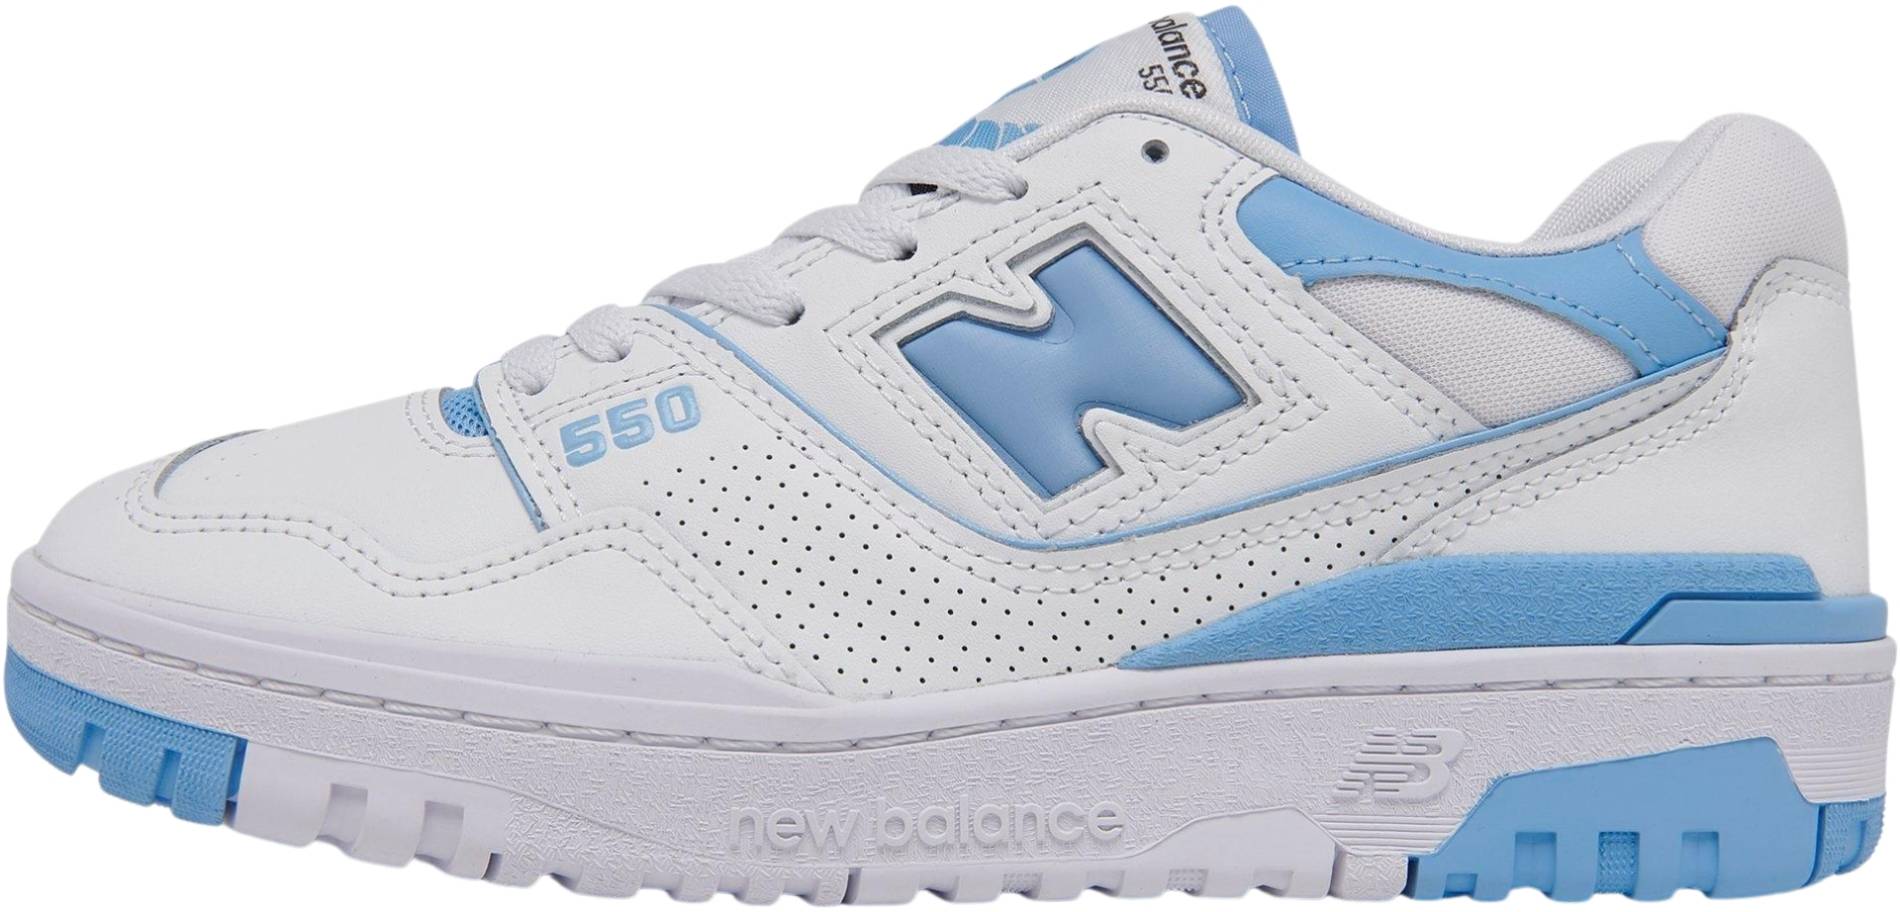 New Balance 550 in white + (only |